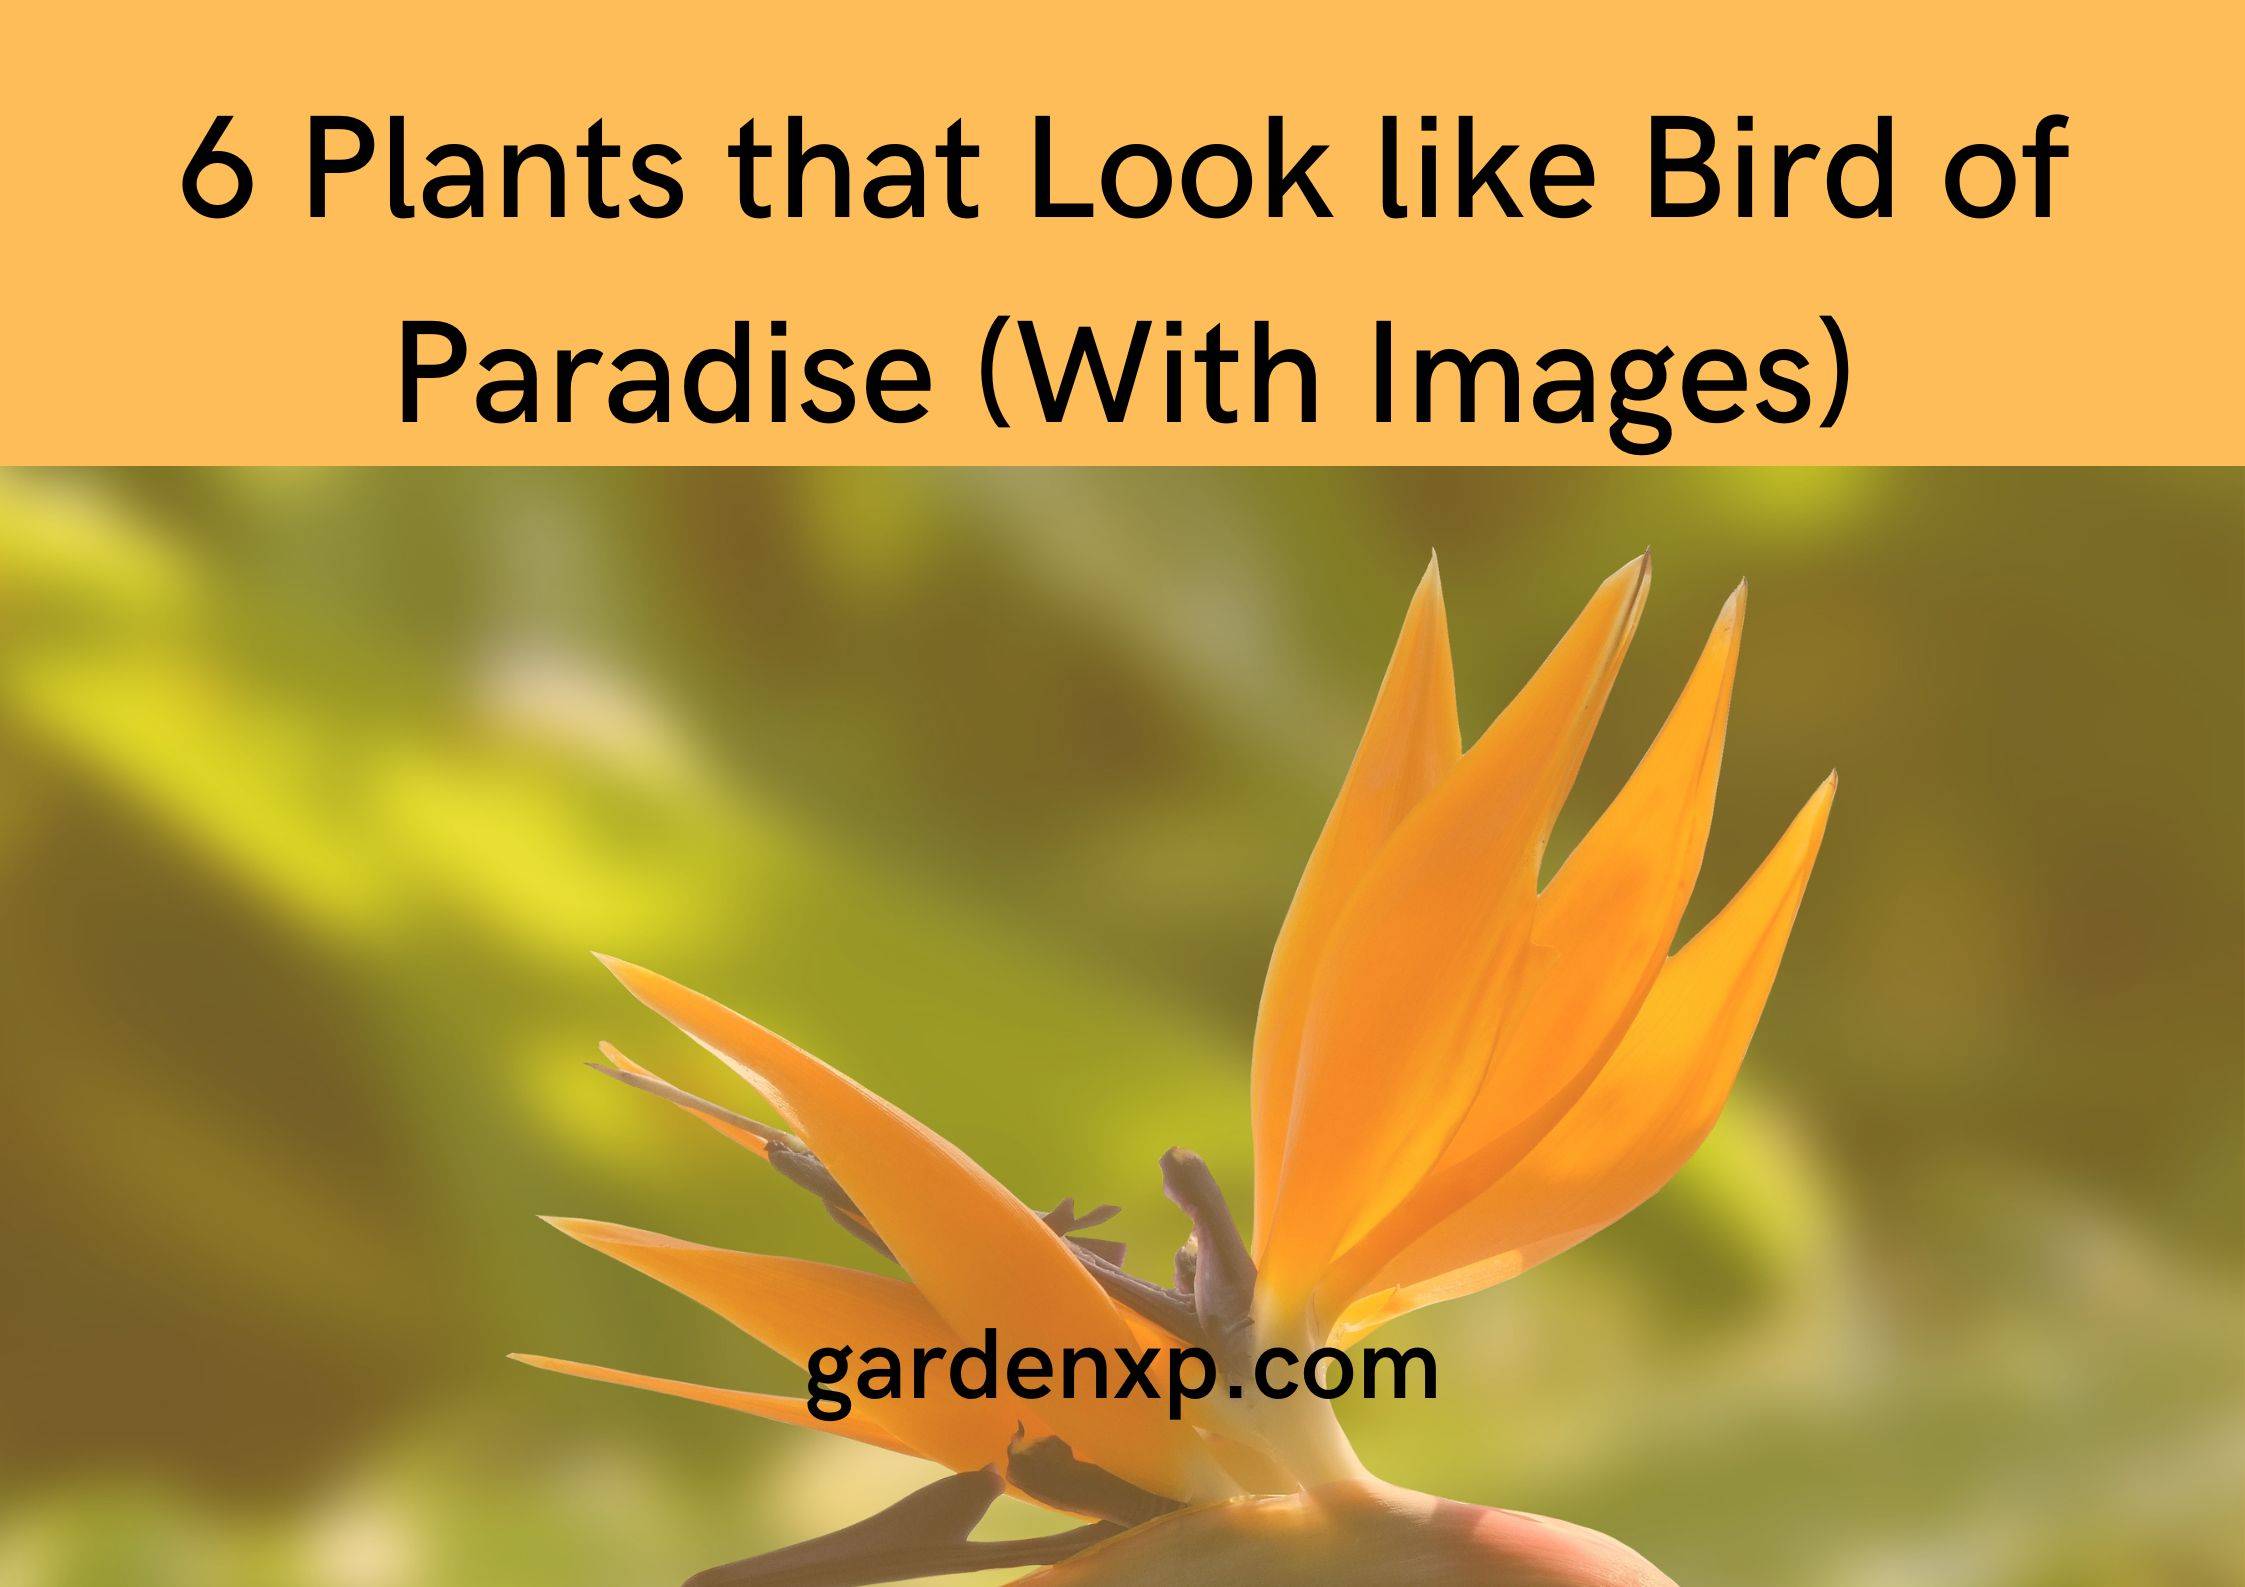 6 Plants that Look like Birds of Paradise (With Images)